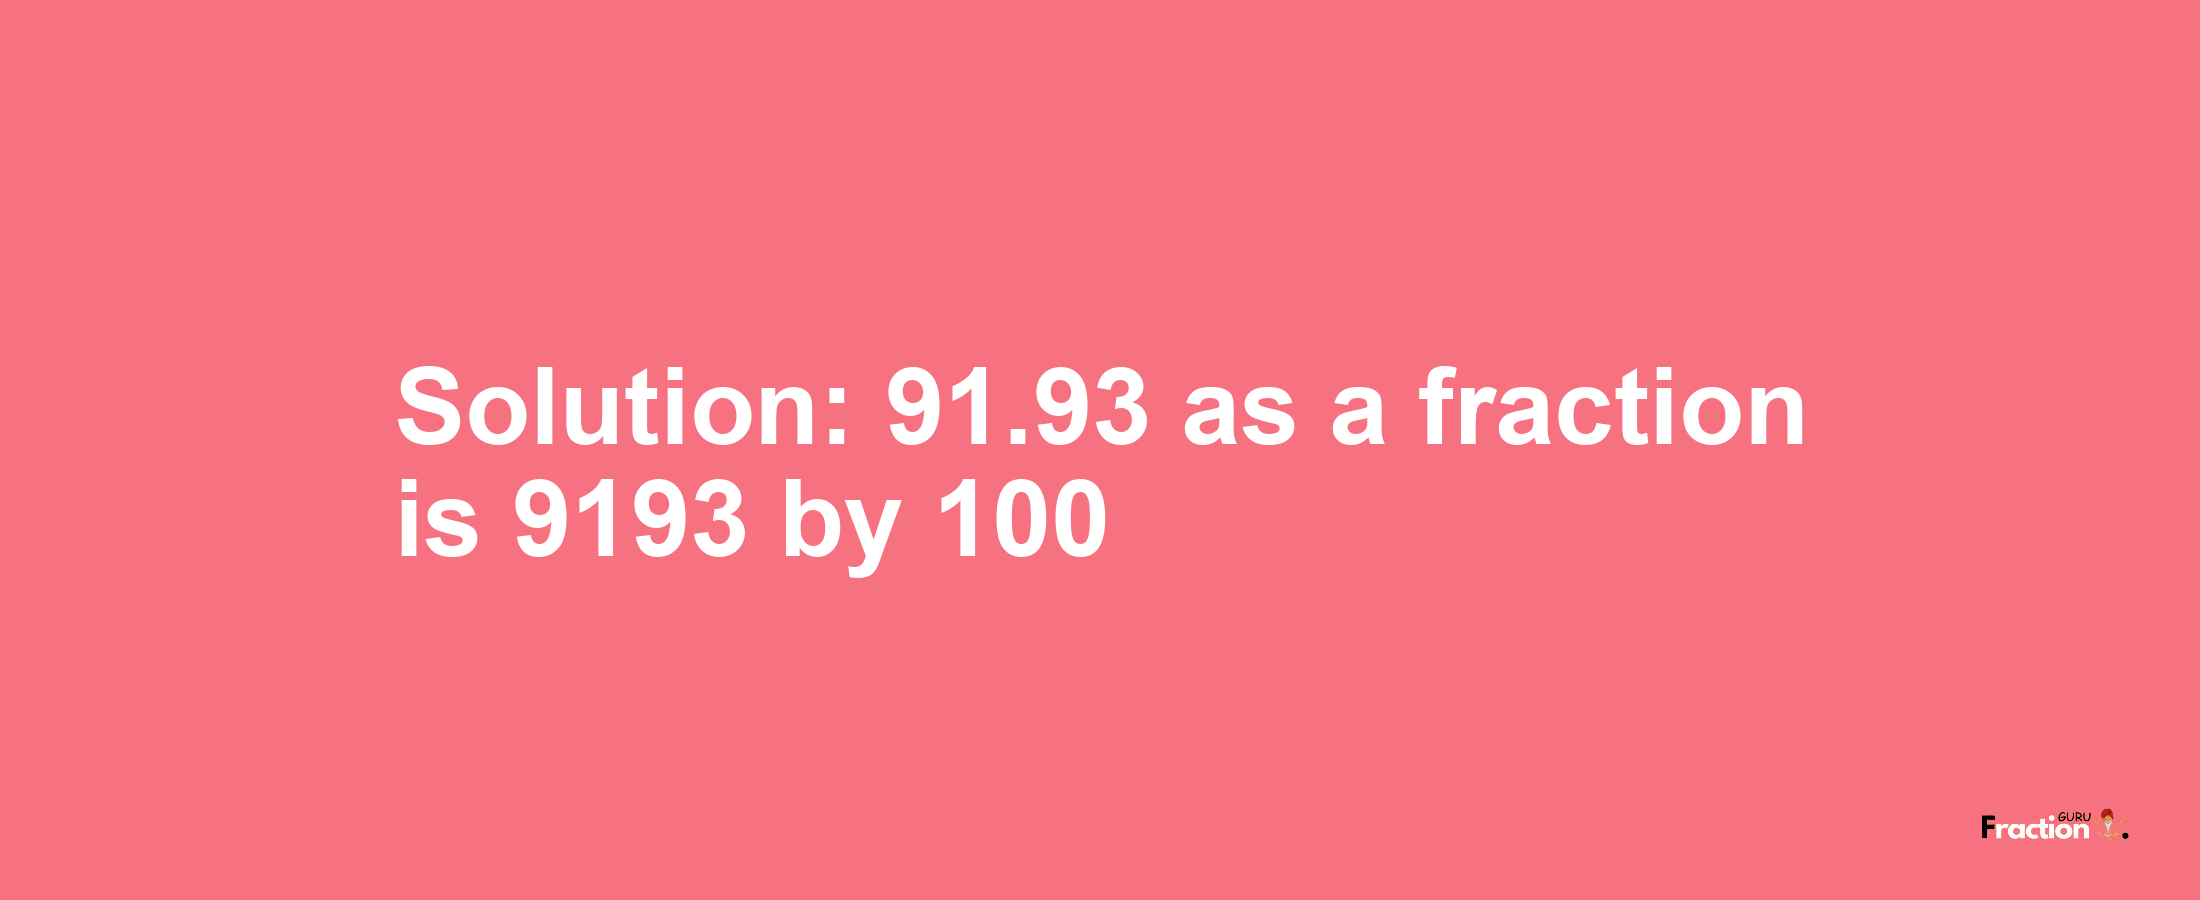 Solution:91.93 as a fraction is 9193/100